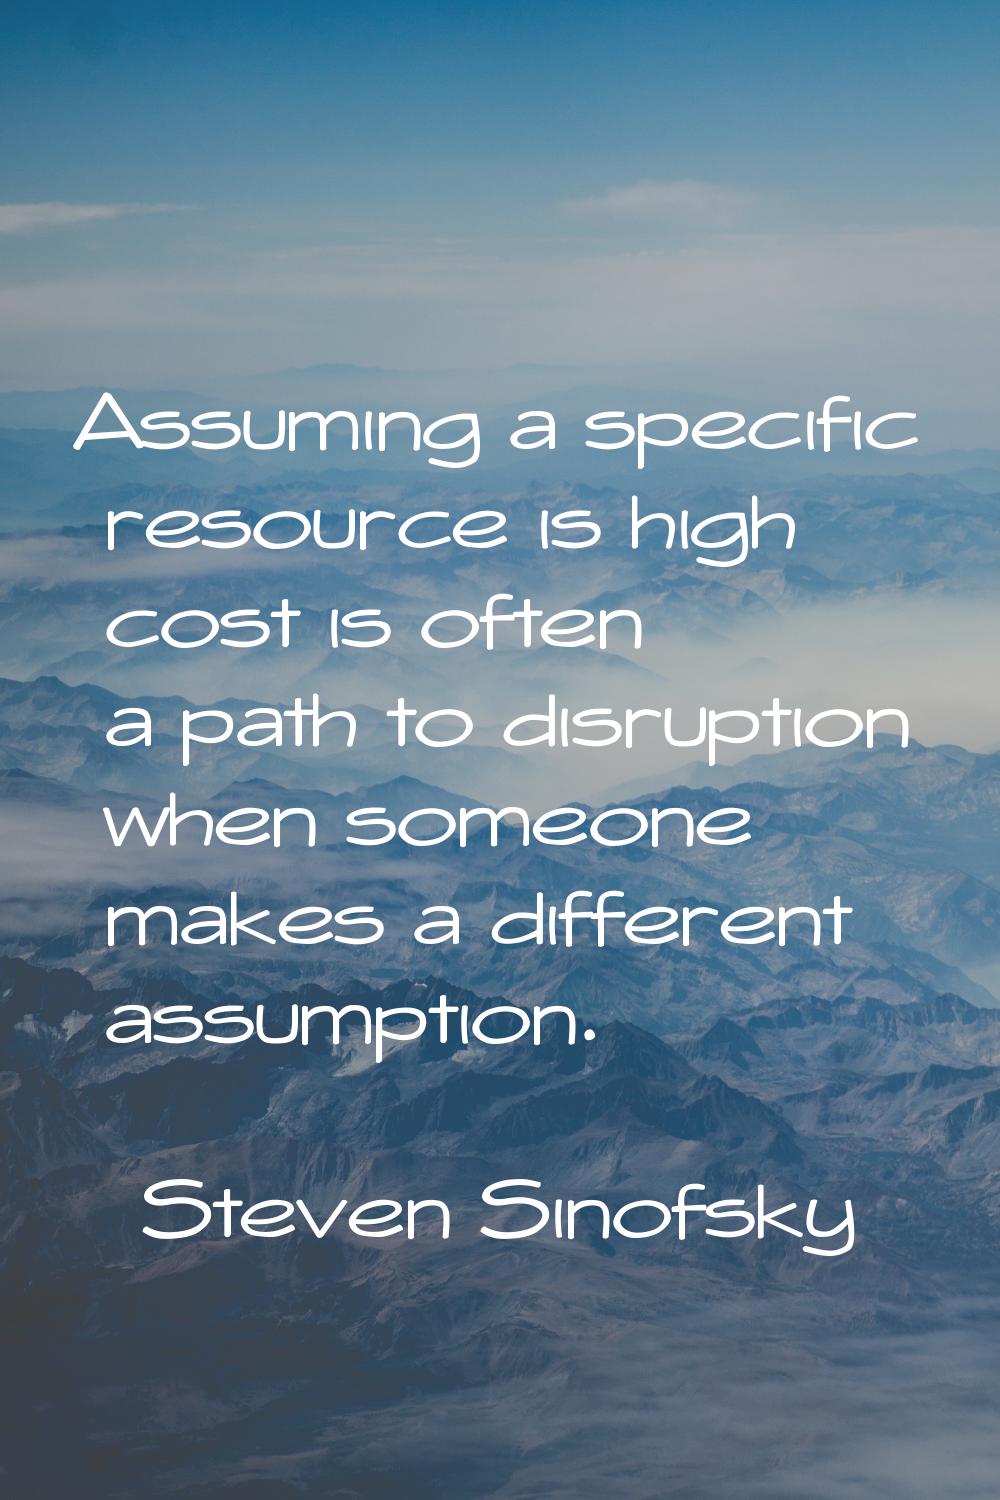 Assuming a specific resource is high cost is often a path to disruption when someone makes a differ